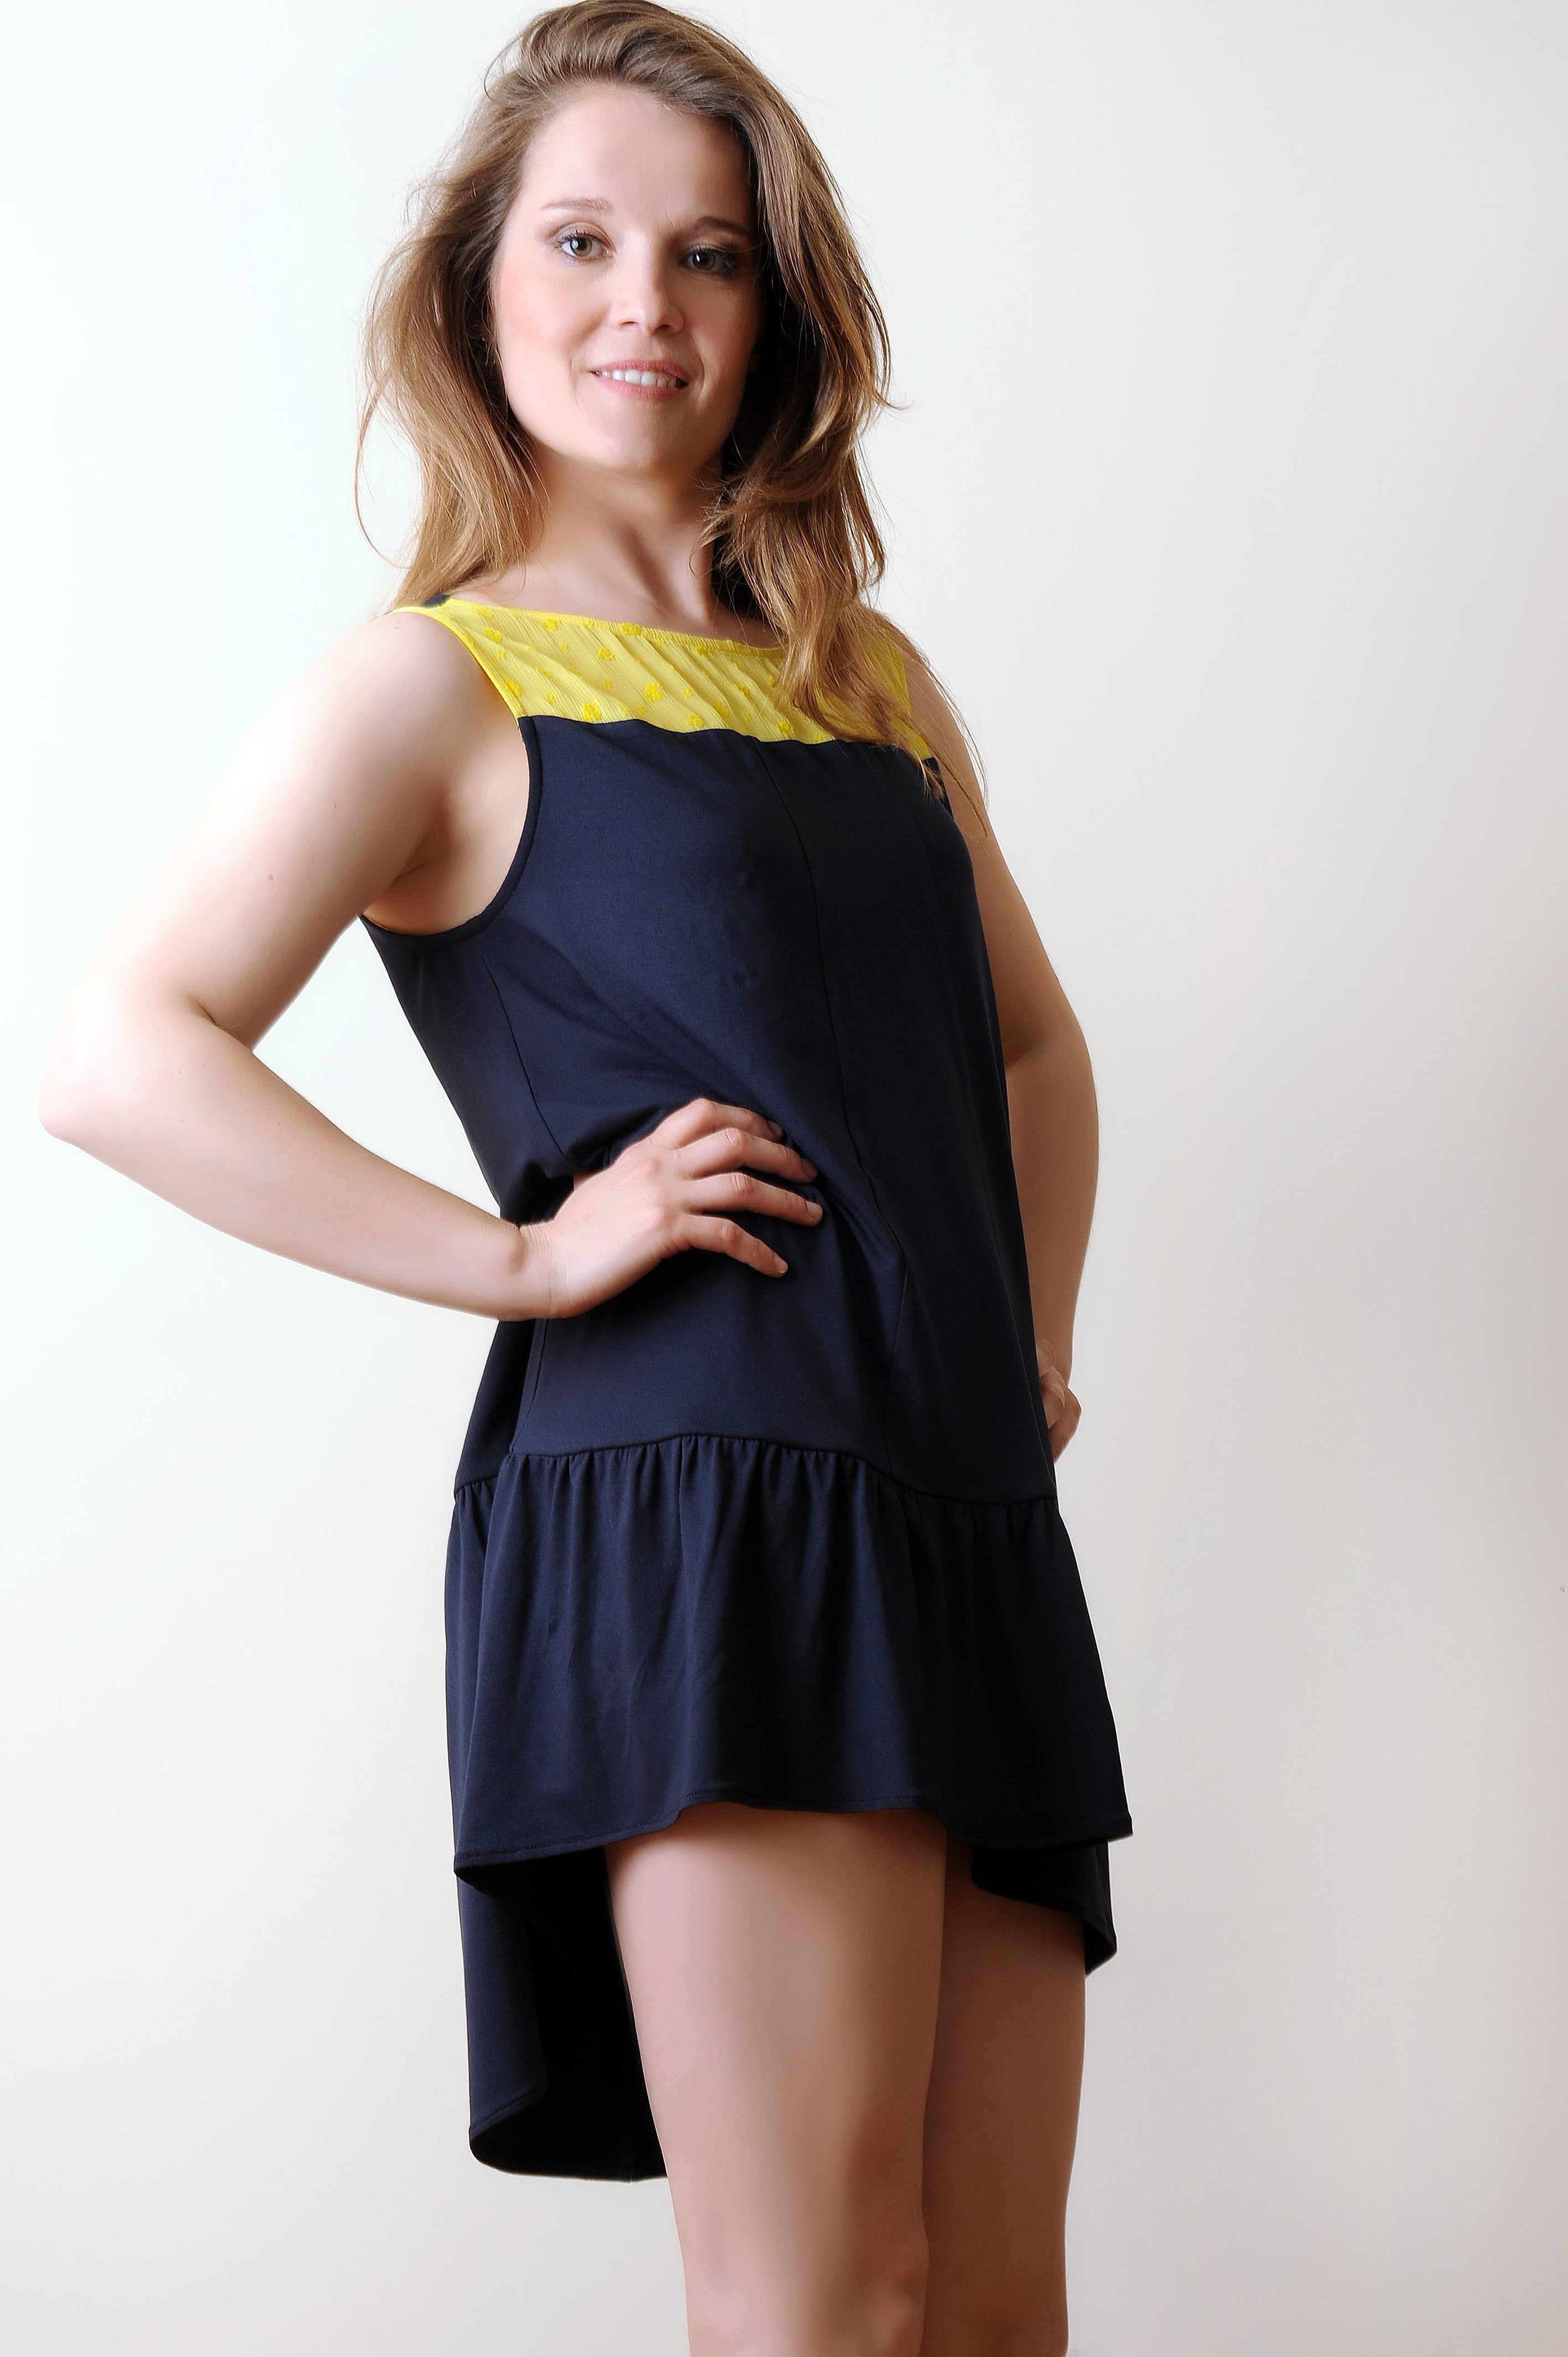 Jersey dress by Pisca